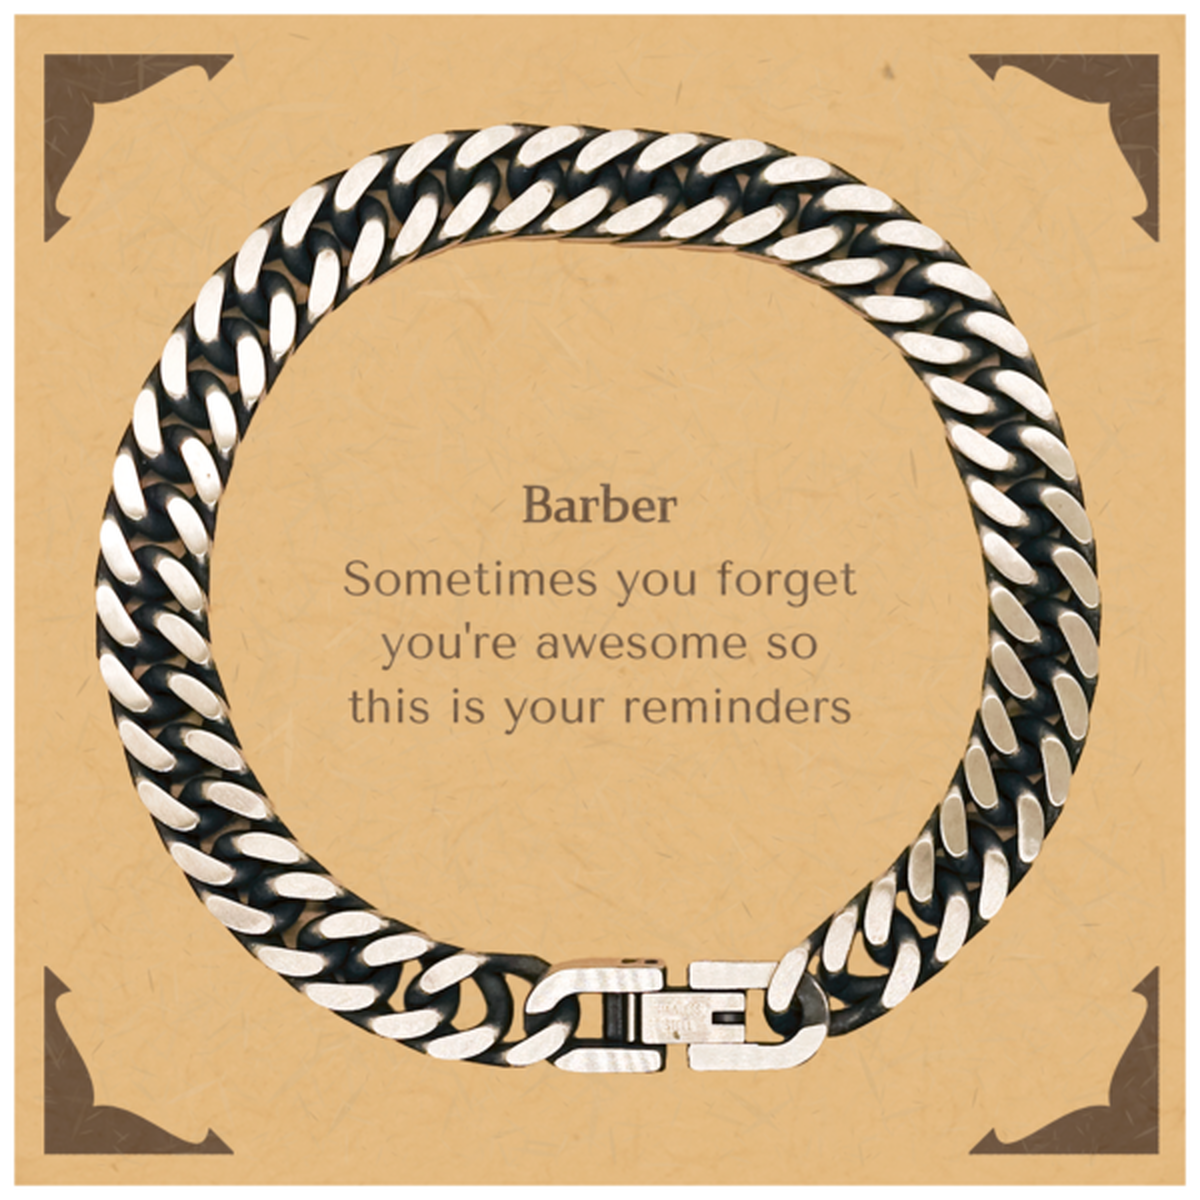 Sentimental Barber Cuban Link Chain Bracelet, Barber Sometimes you forget you're awesome so this is your reminders, Graduation Christmas Birthday Gifts for Barber, Men, Women, Coworkers